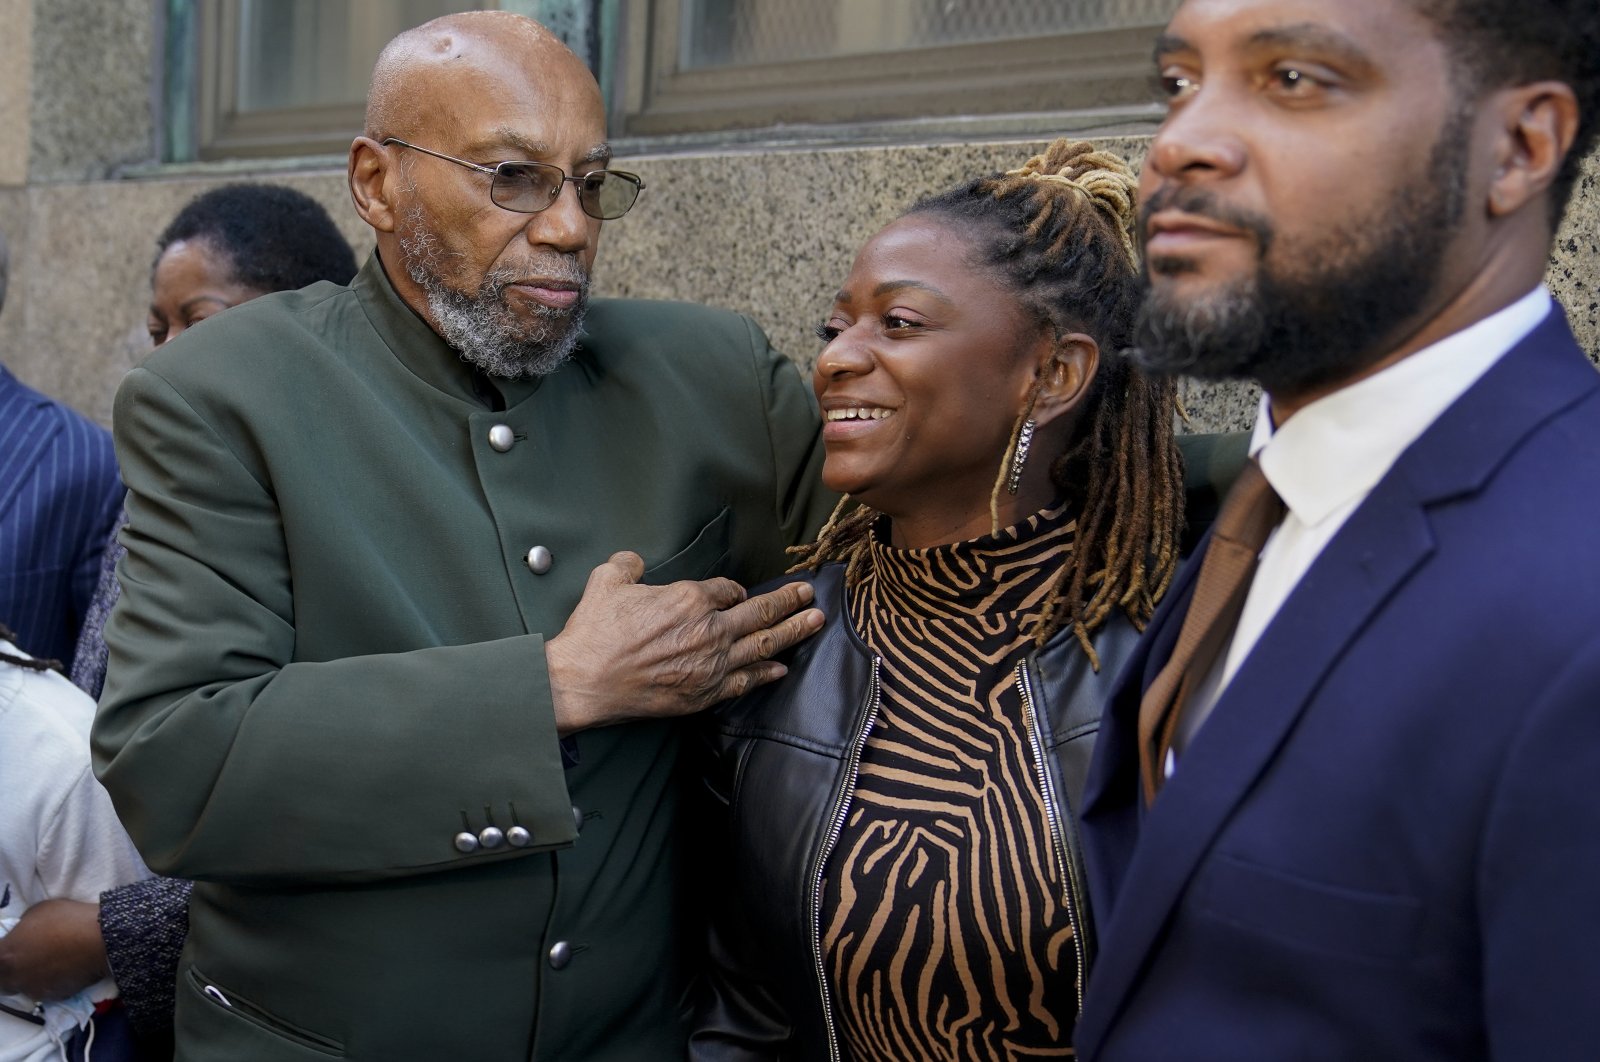 Muhammad Aziz, left, stands outside the courthouse with members of his family after his conviction in the killing of Malcolm X was vacated, Thursday, Nov. 18, 2021, in New York. (AP Photo)